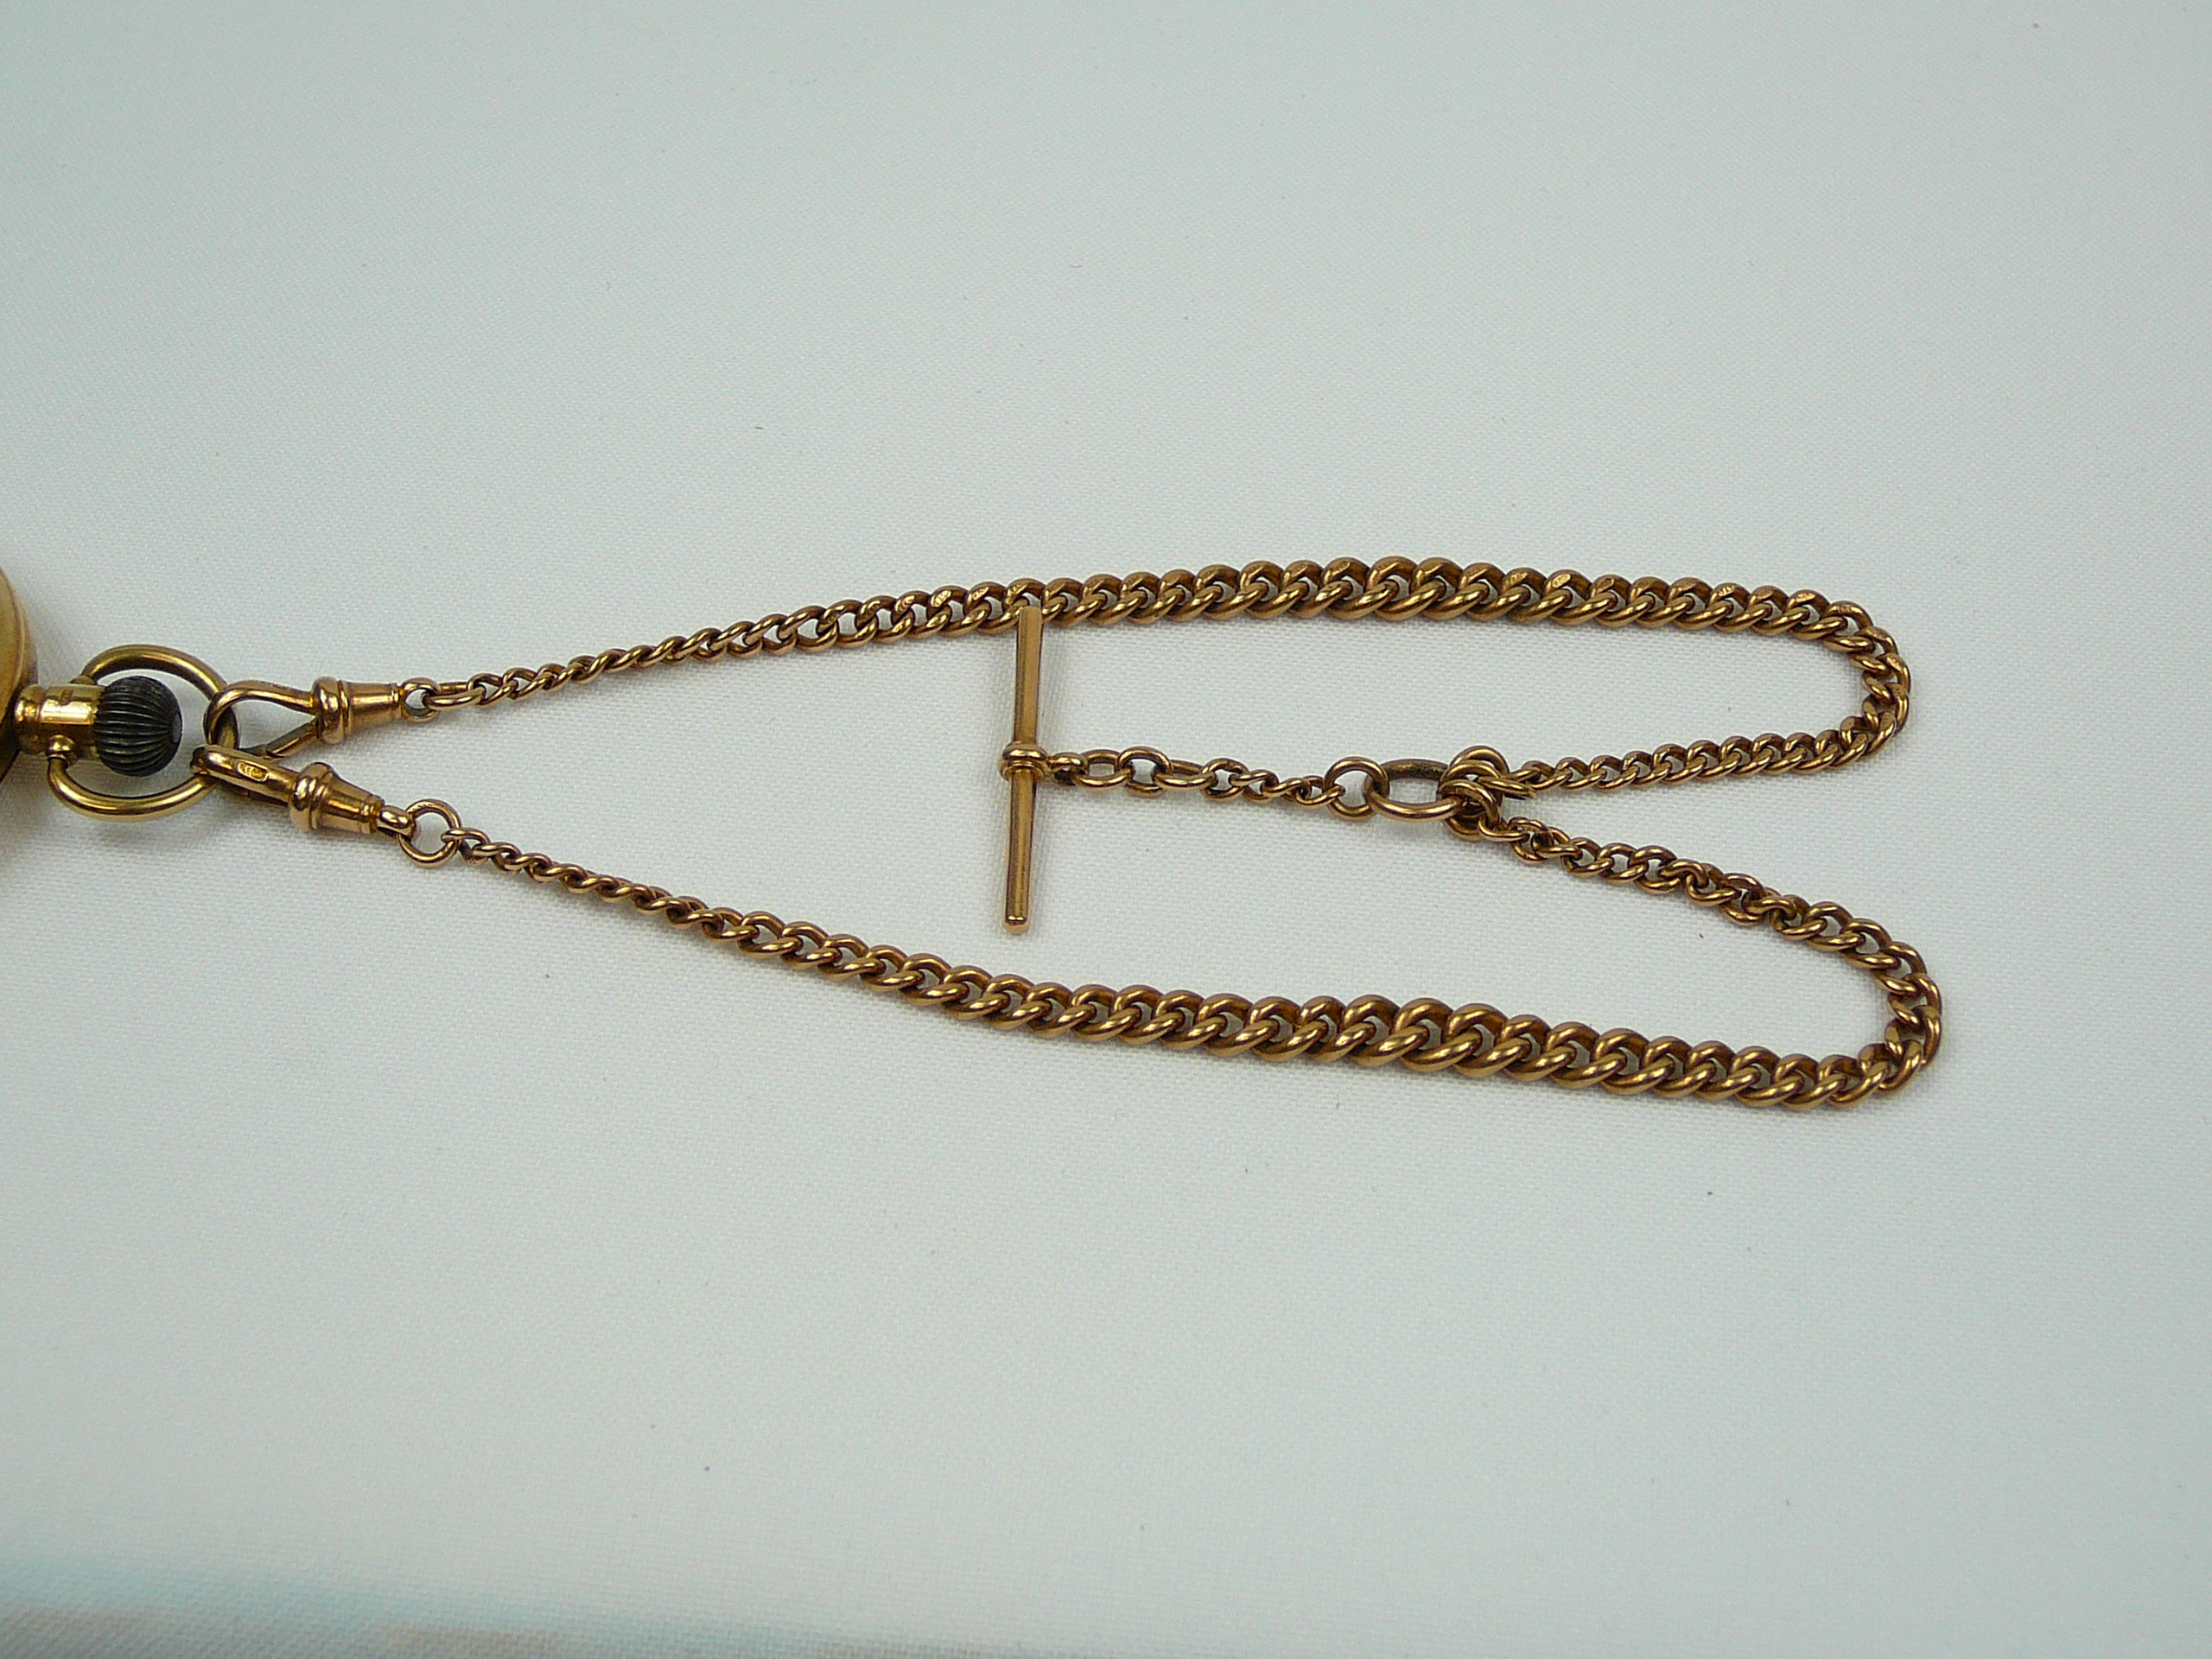 Gents gold pocket watch and chain - Image 9 of 10